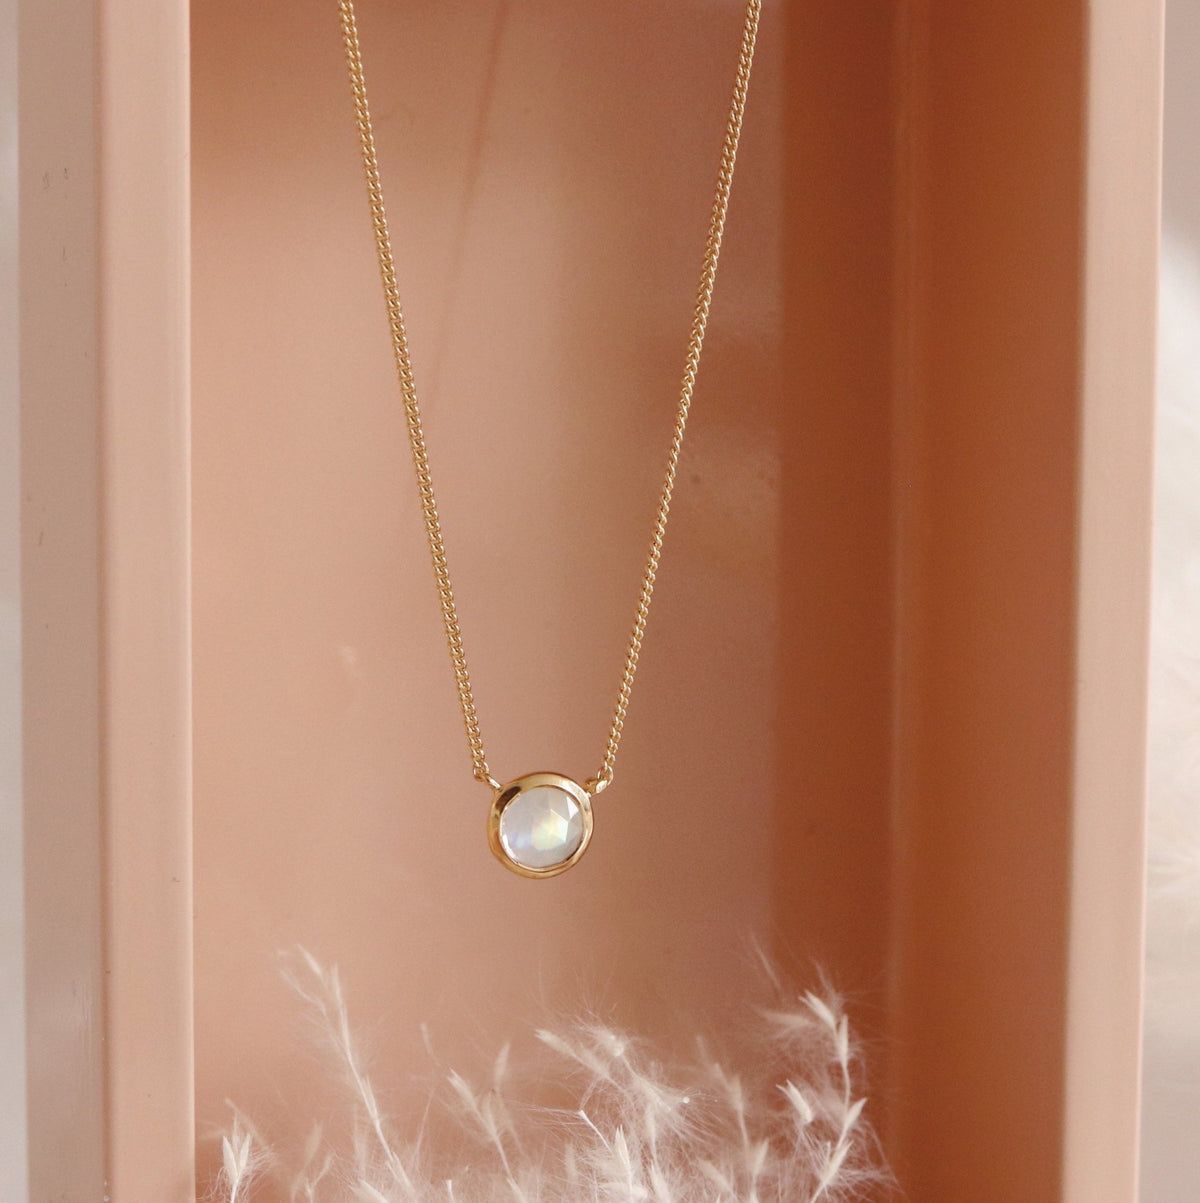 DAINTY LEGACY NECKLACE - RAINBOW MOONSTONE &amp; GOLD - SO PRETTY CARA COTTER